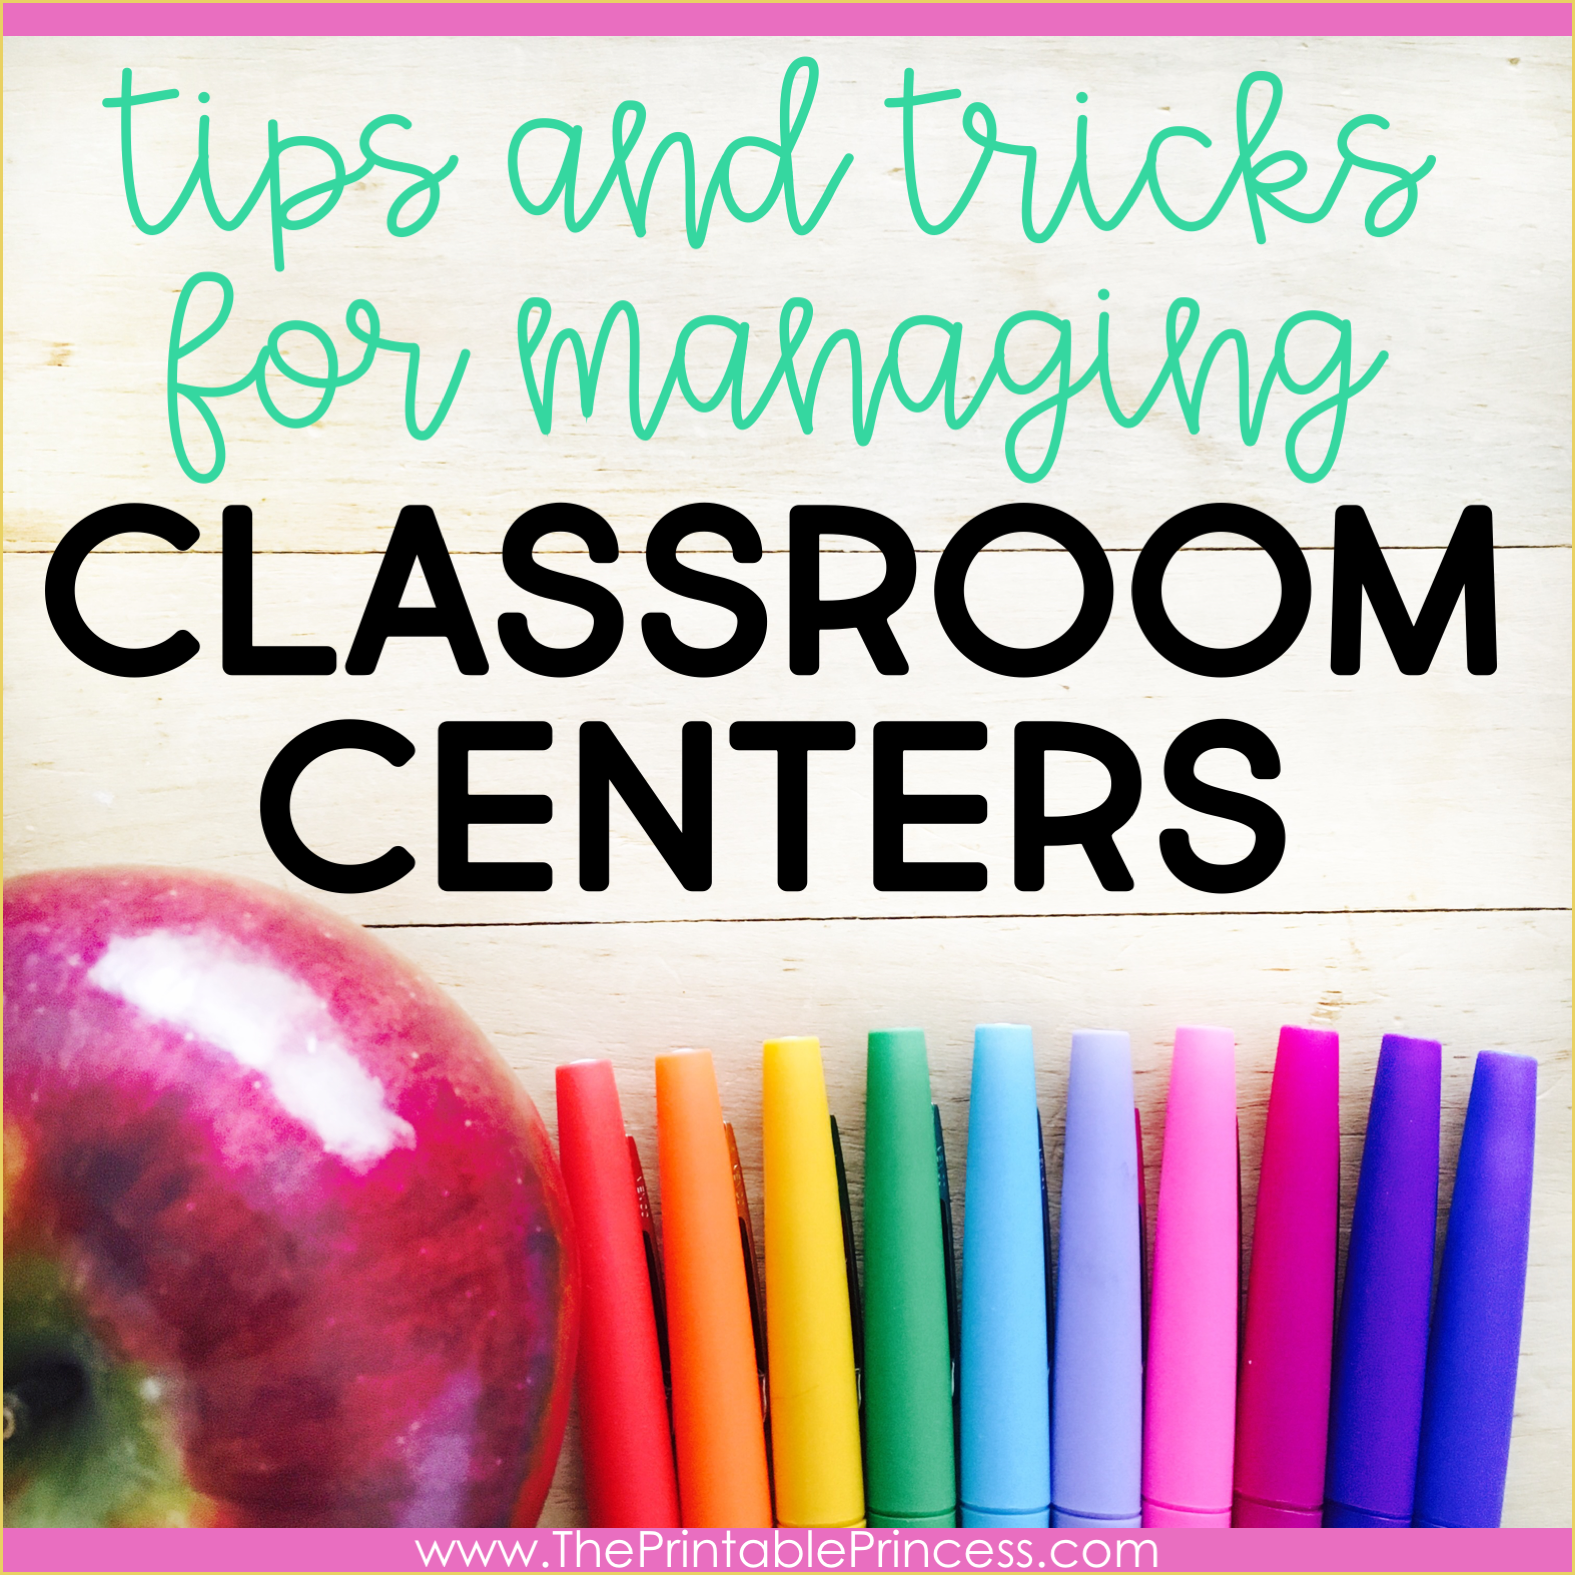 10 Tips for Managing Classroom Centers